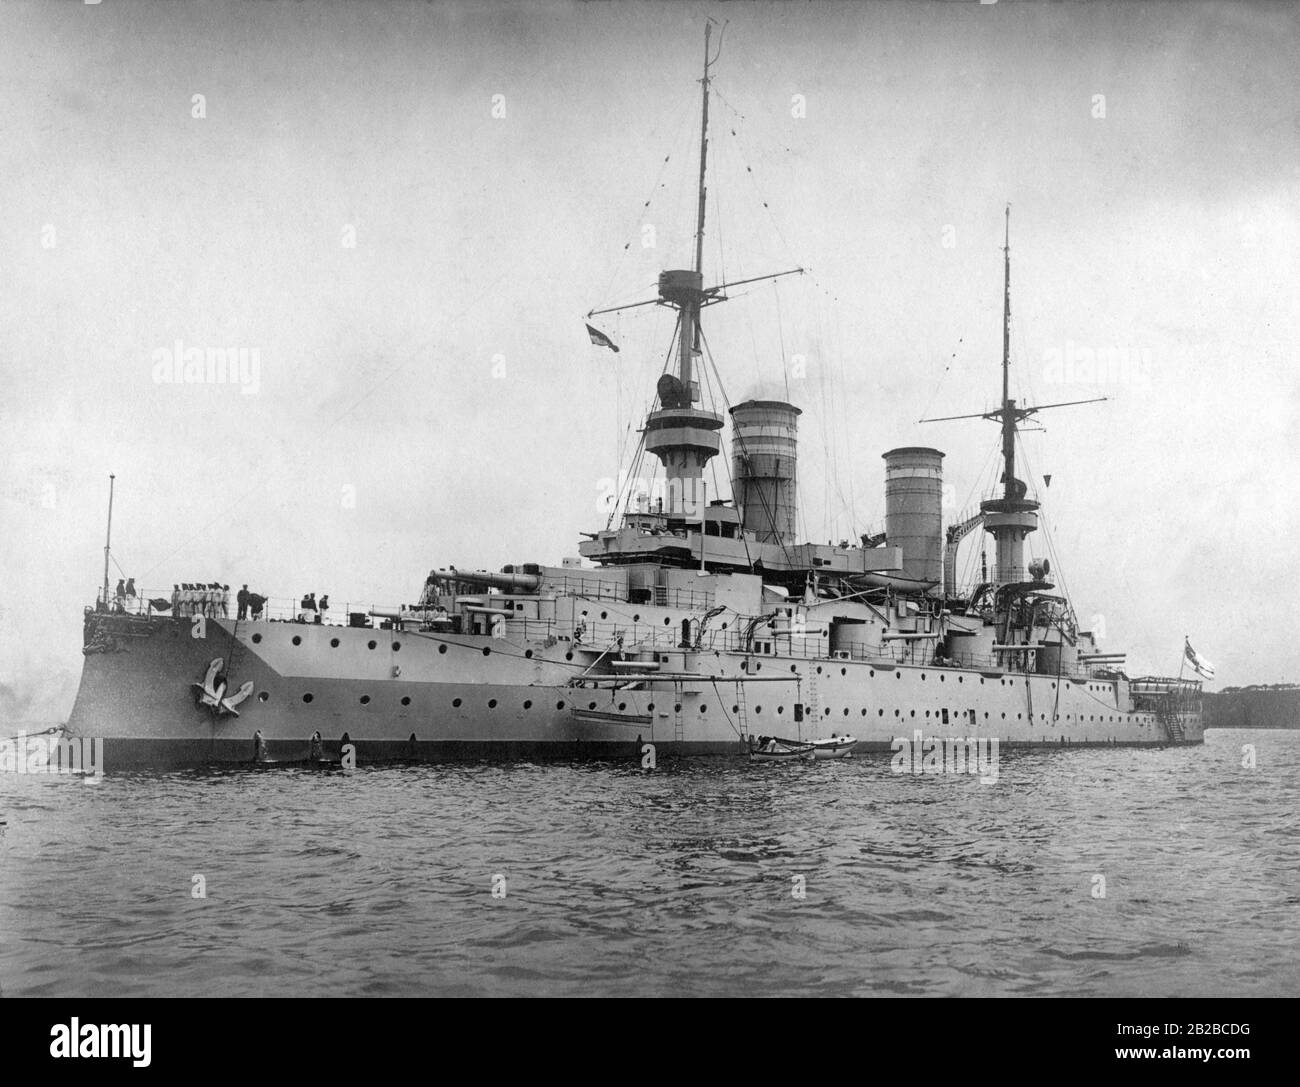 The armoured ship 'Kaiser Barbarossa' was the last ship of the Kaiser Friedrich class, one of the five classes of liners of the Imperial Navy. After it was used in the First World War, it was scrapped in 1920. Stock Photo